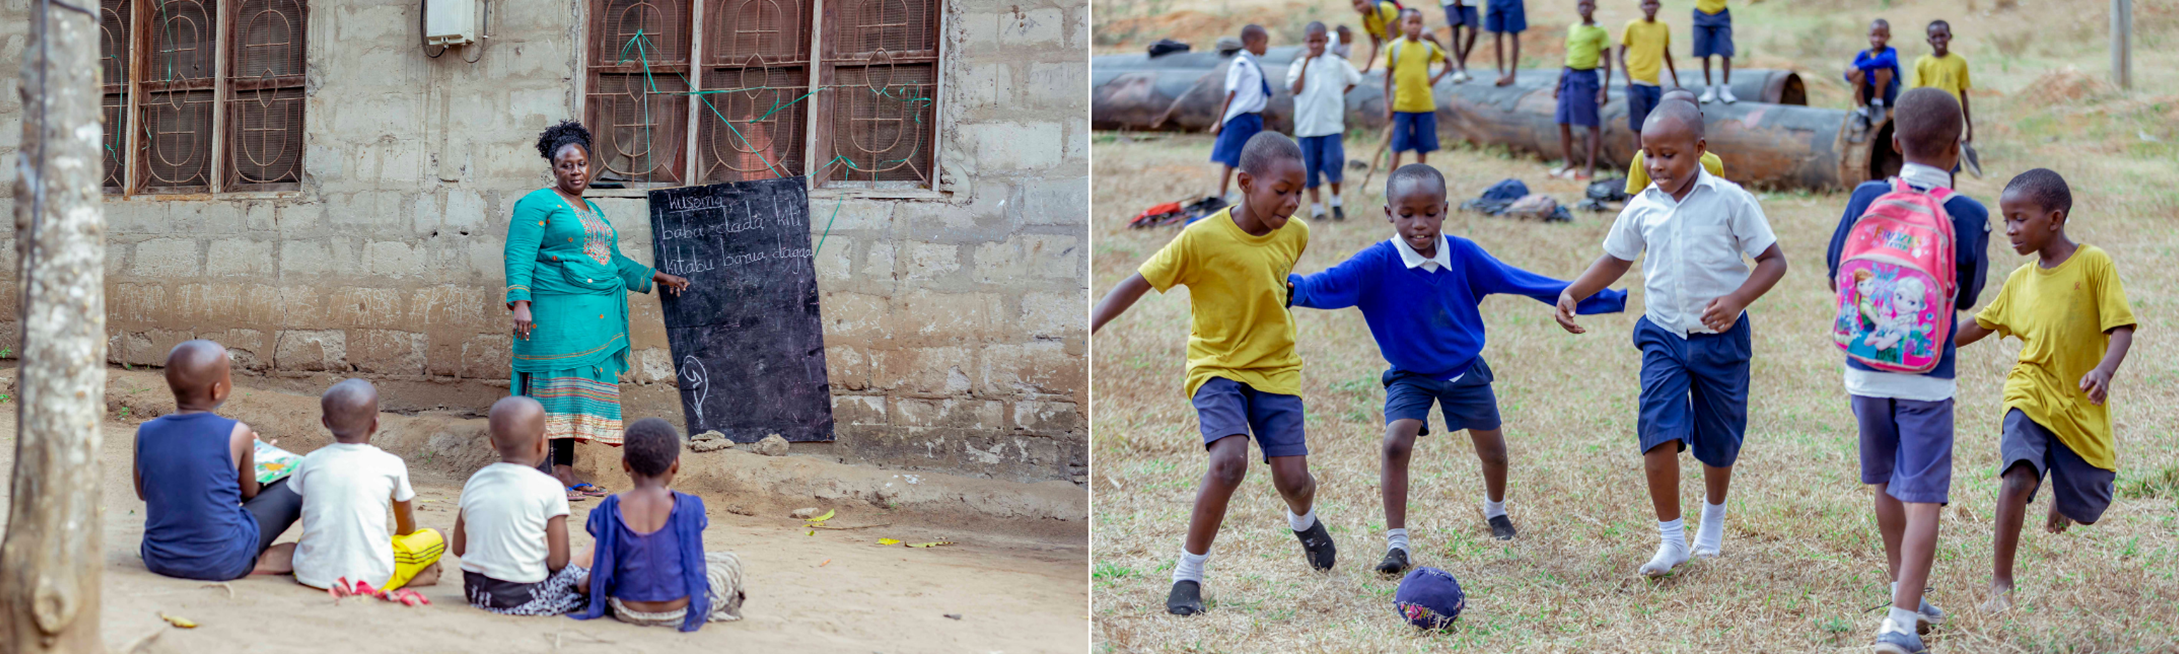 Left: “Emmaculata teaches Swahili outside Joshua’s home.” Right: “Joshua plays football with his friends from Grade 3 and 4. The group uses a locally made ball.”